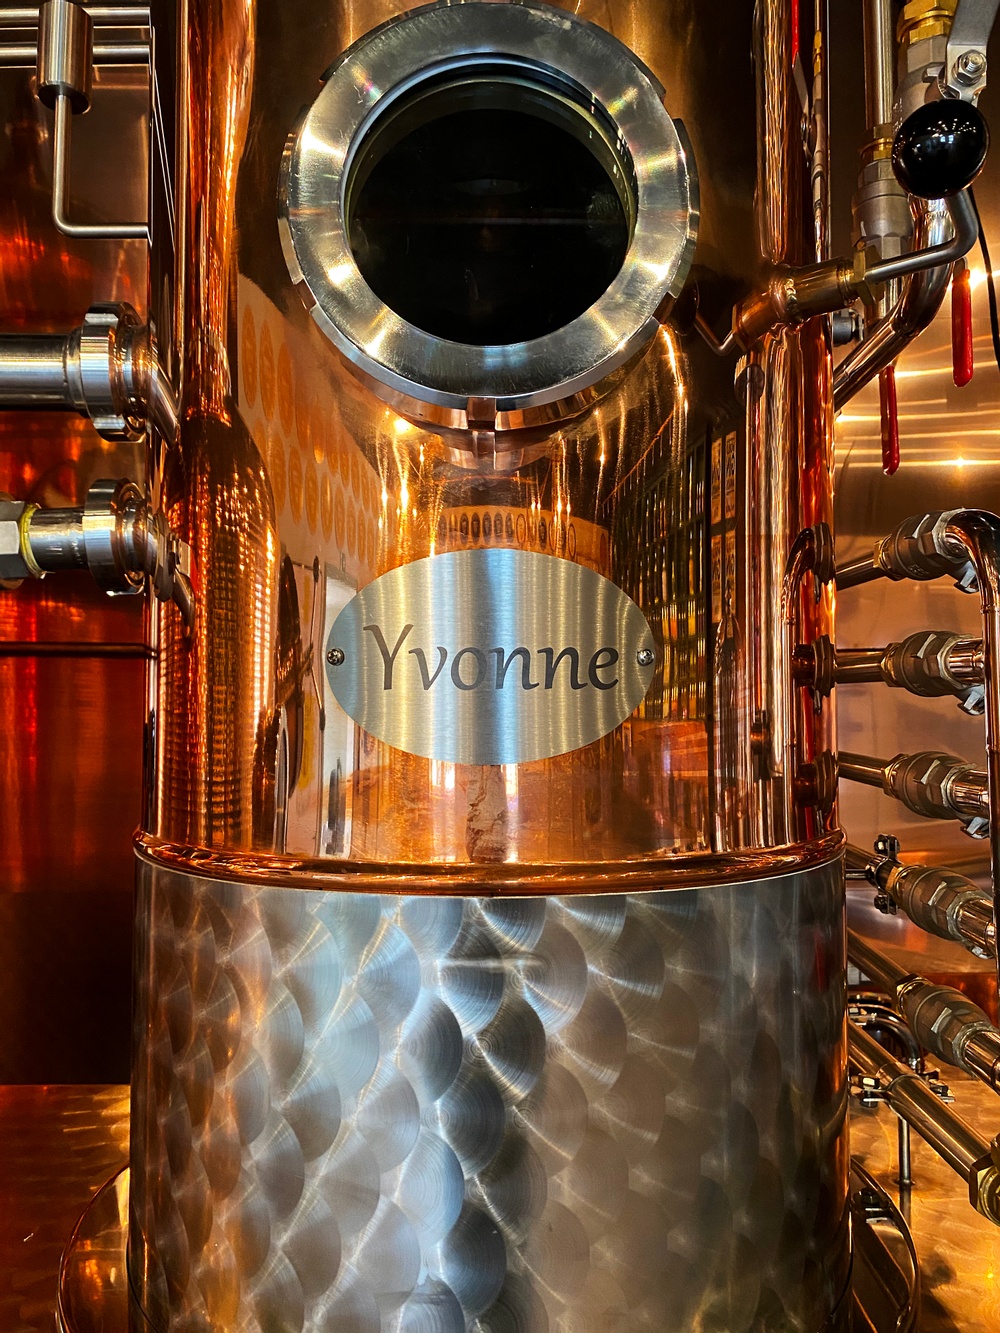 Hand hammered copper still, 1.000 l. Named after Jon Hillgrens mother Yvonne, who has contributed to Hernö Gins development from the start. The copper still Yvonne is working side by side with Marit and together they are responcible for the main production of Hernö Gin from April 2021.